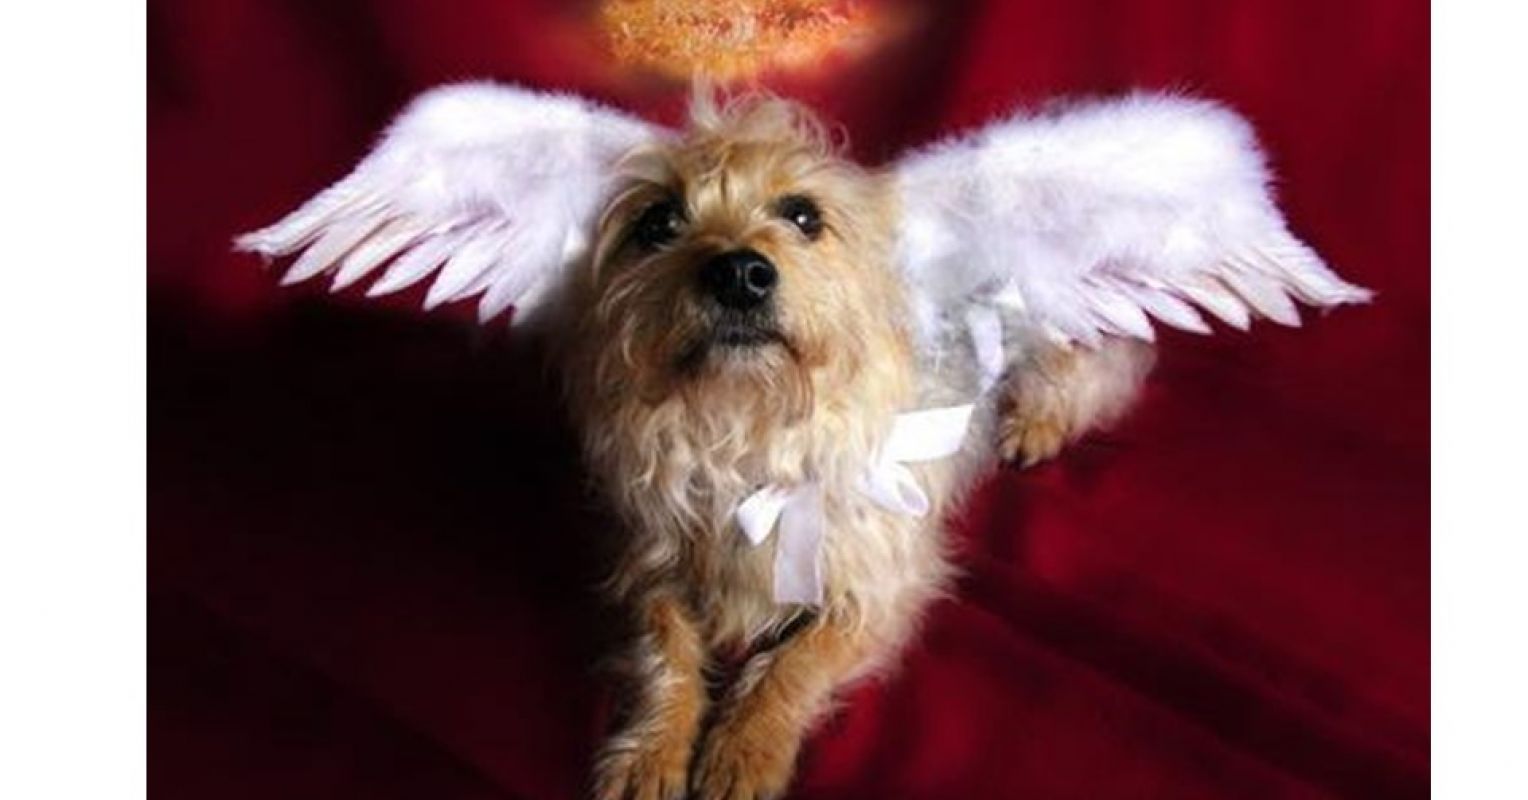 do cats and dogs go to heaven